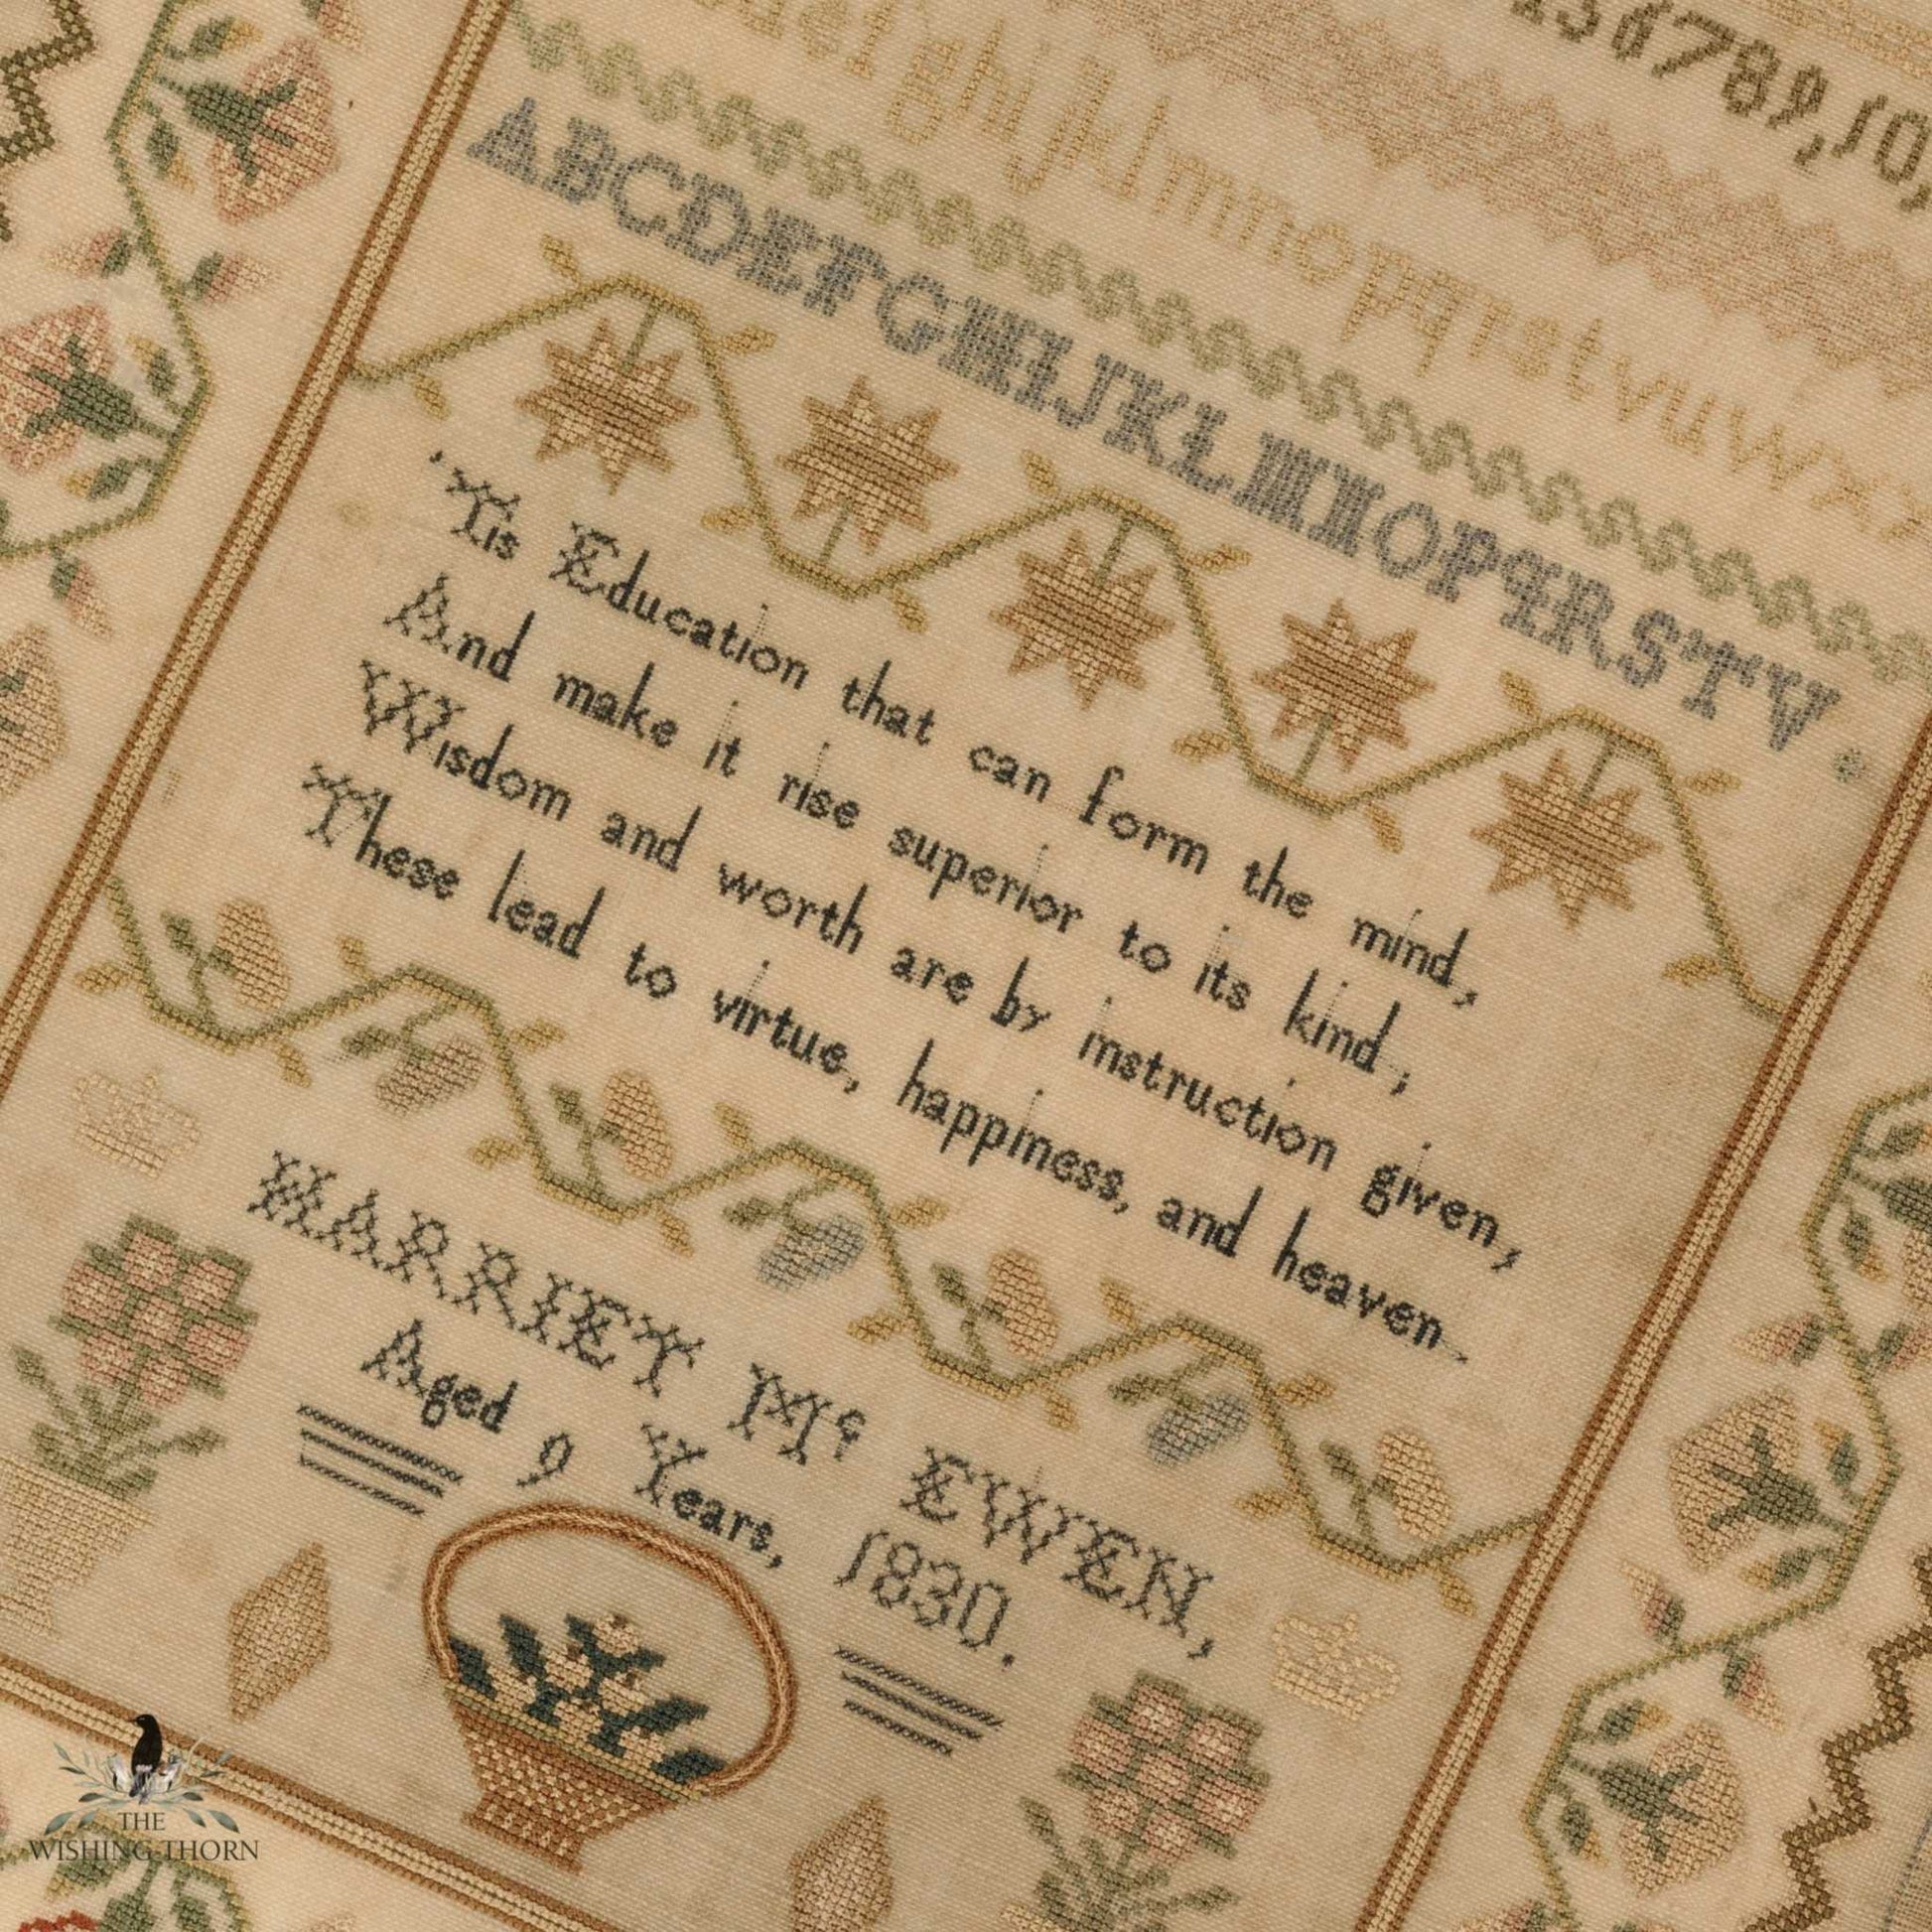 closeup of the verse area of the sampler stitched by Harriet Mc Ewen in 1830